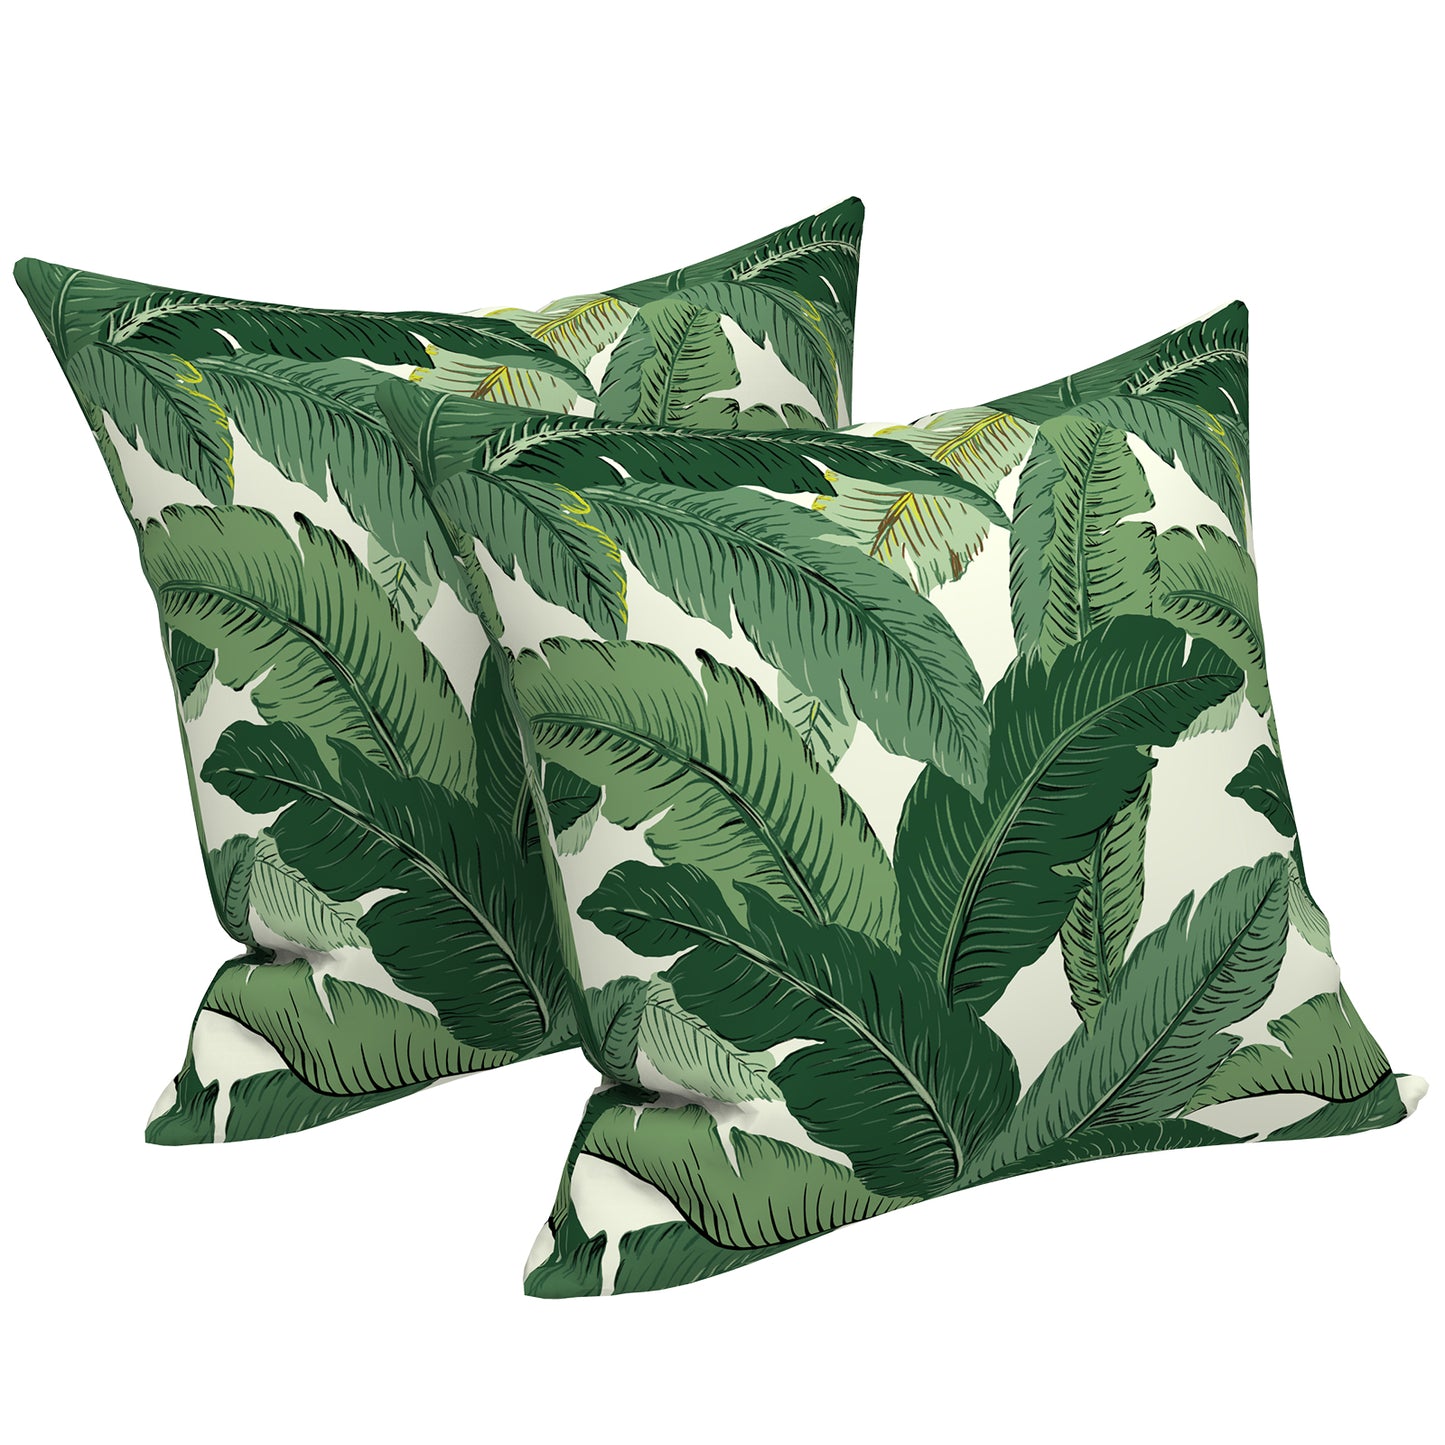 Melody Elephant Outdoor Throw Pillow Covers Pack of 2, Decorative Water Repellent Square Pillow Cases 18x18 Inch, Patio Pillowcases for Home Patio Furniture Use, Swaying Palms Green